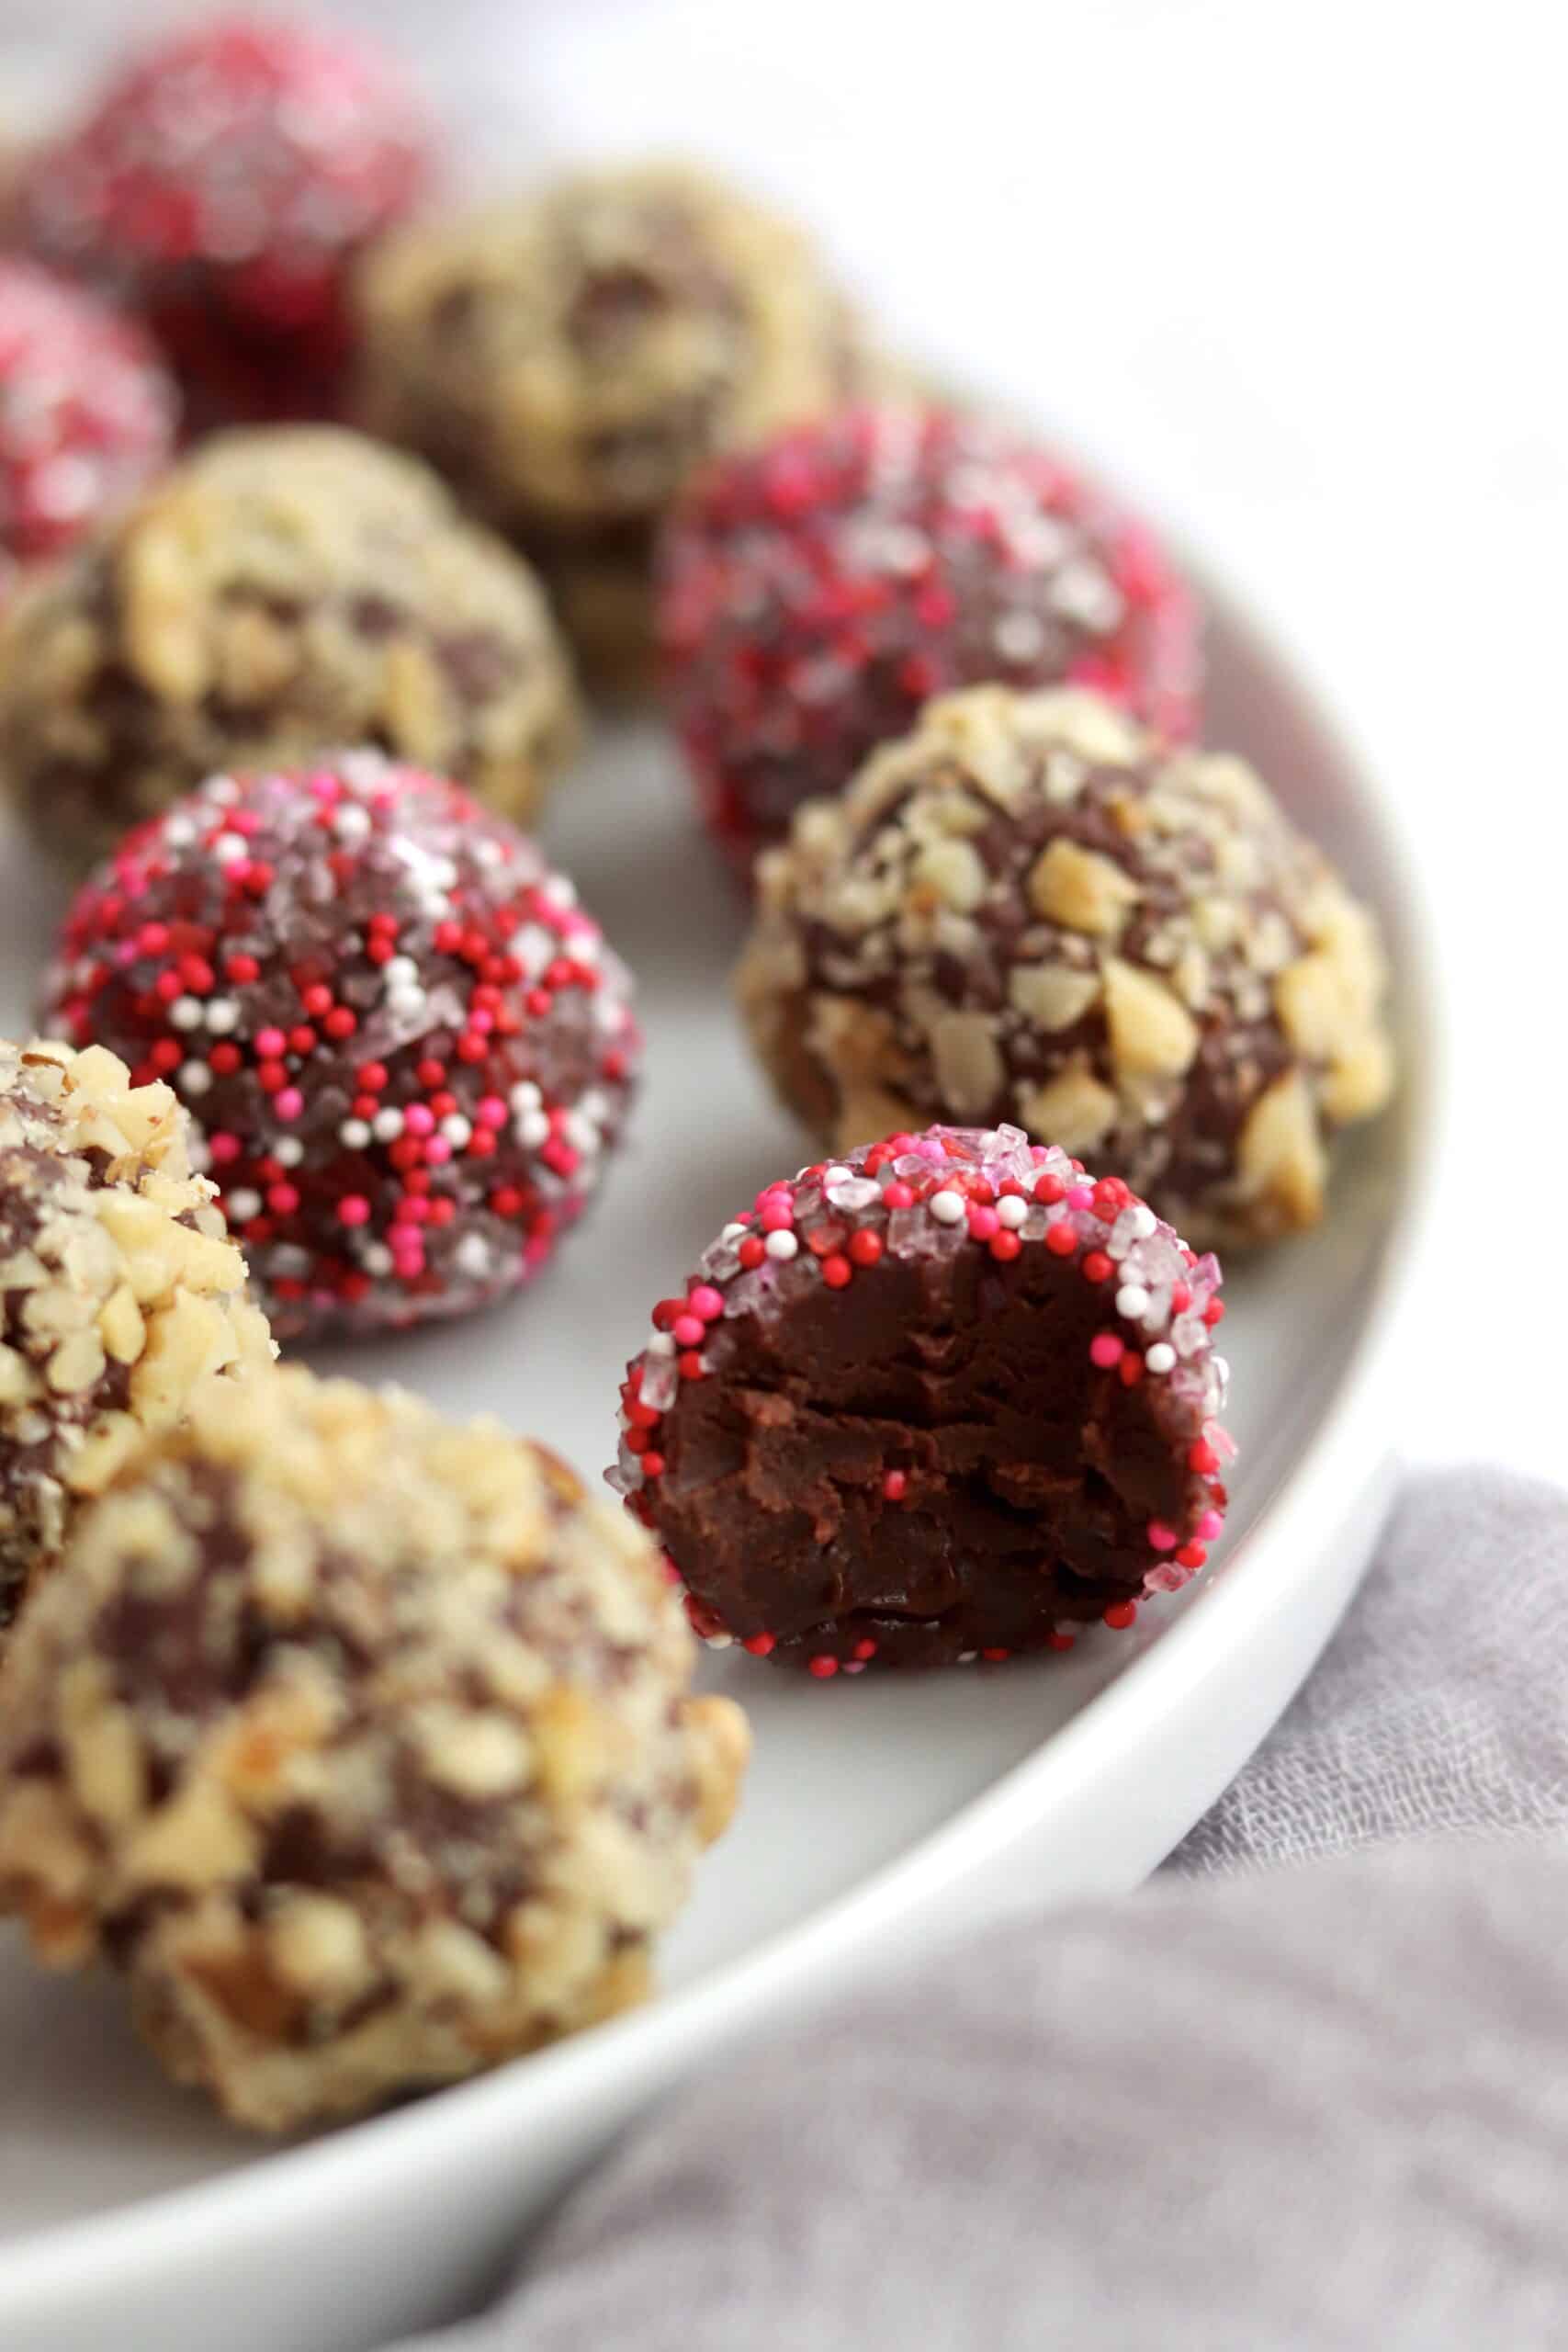 Easy chocolate truffles on a plate with sprinkles and chopped nuts